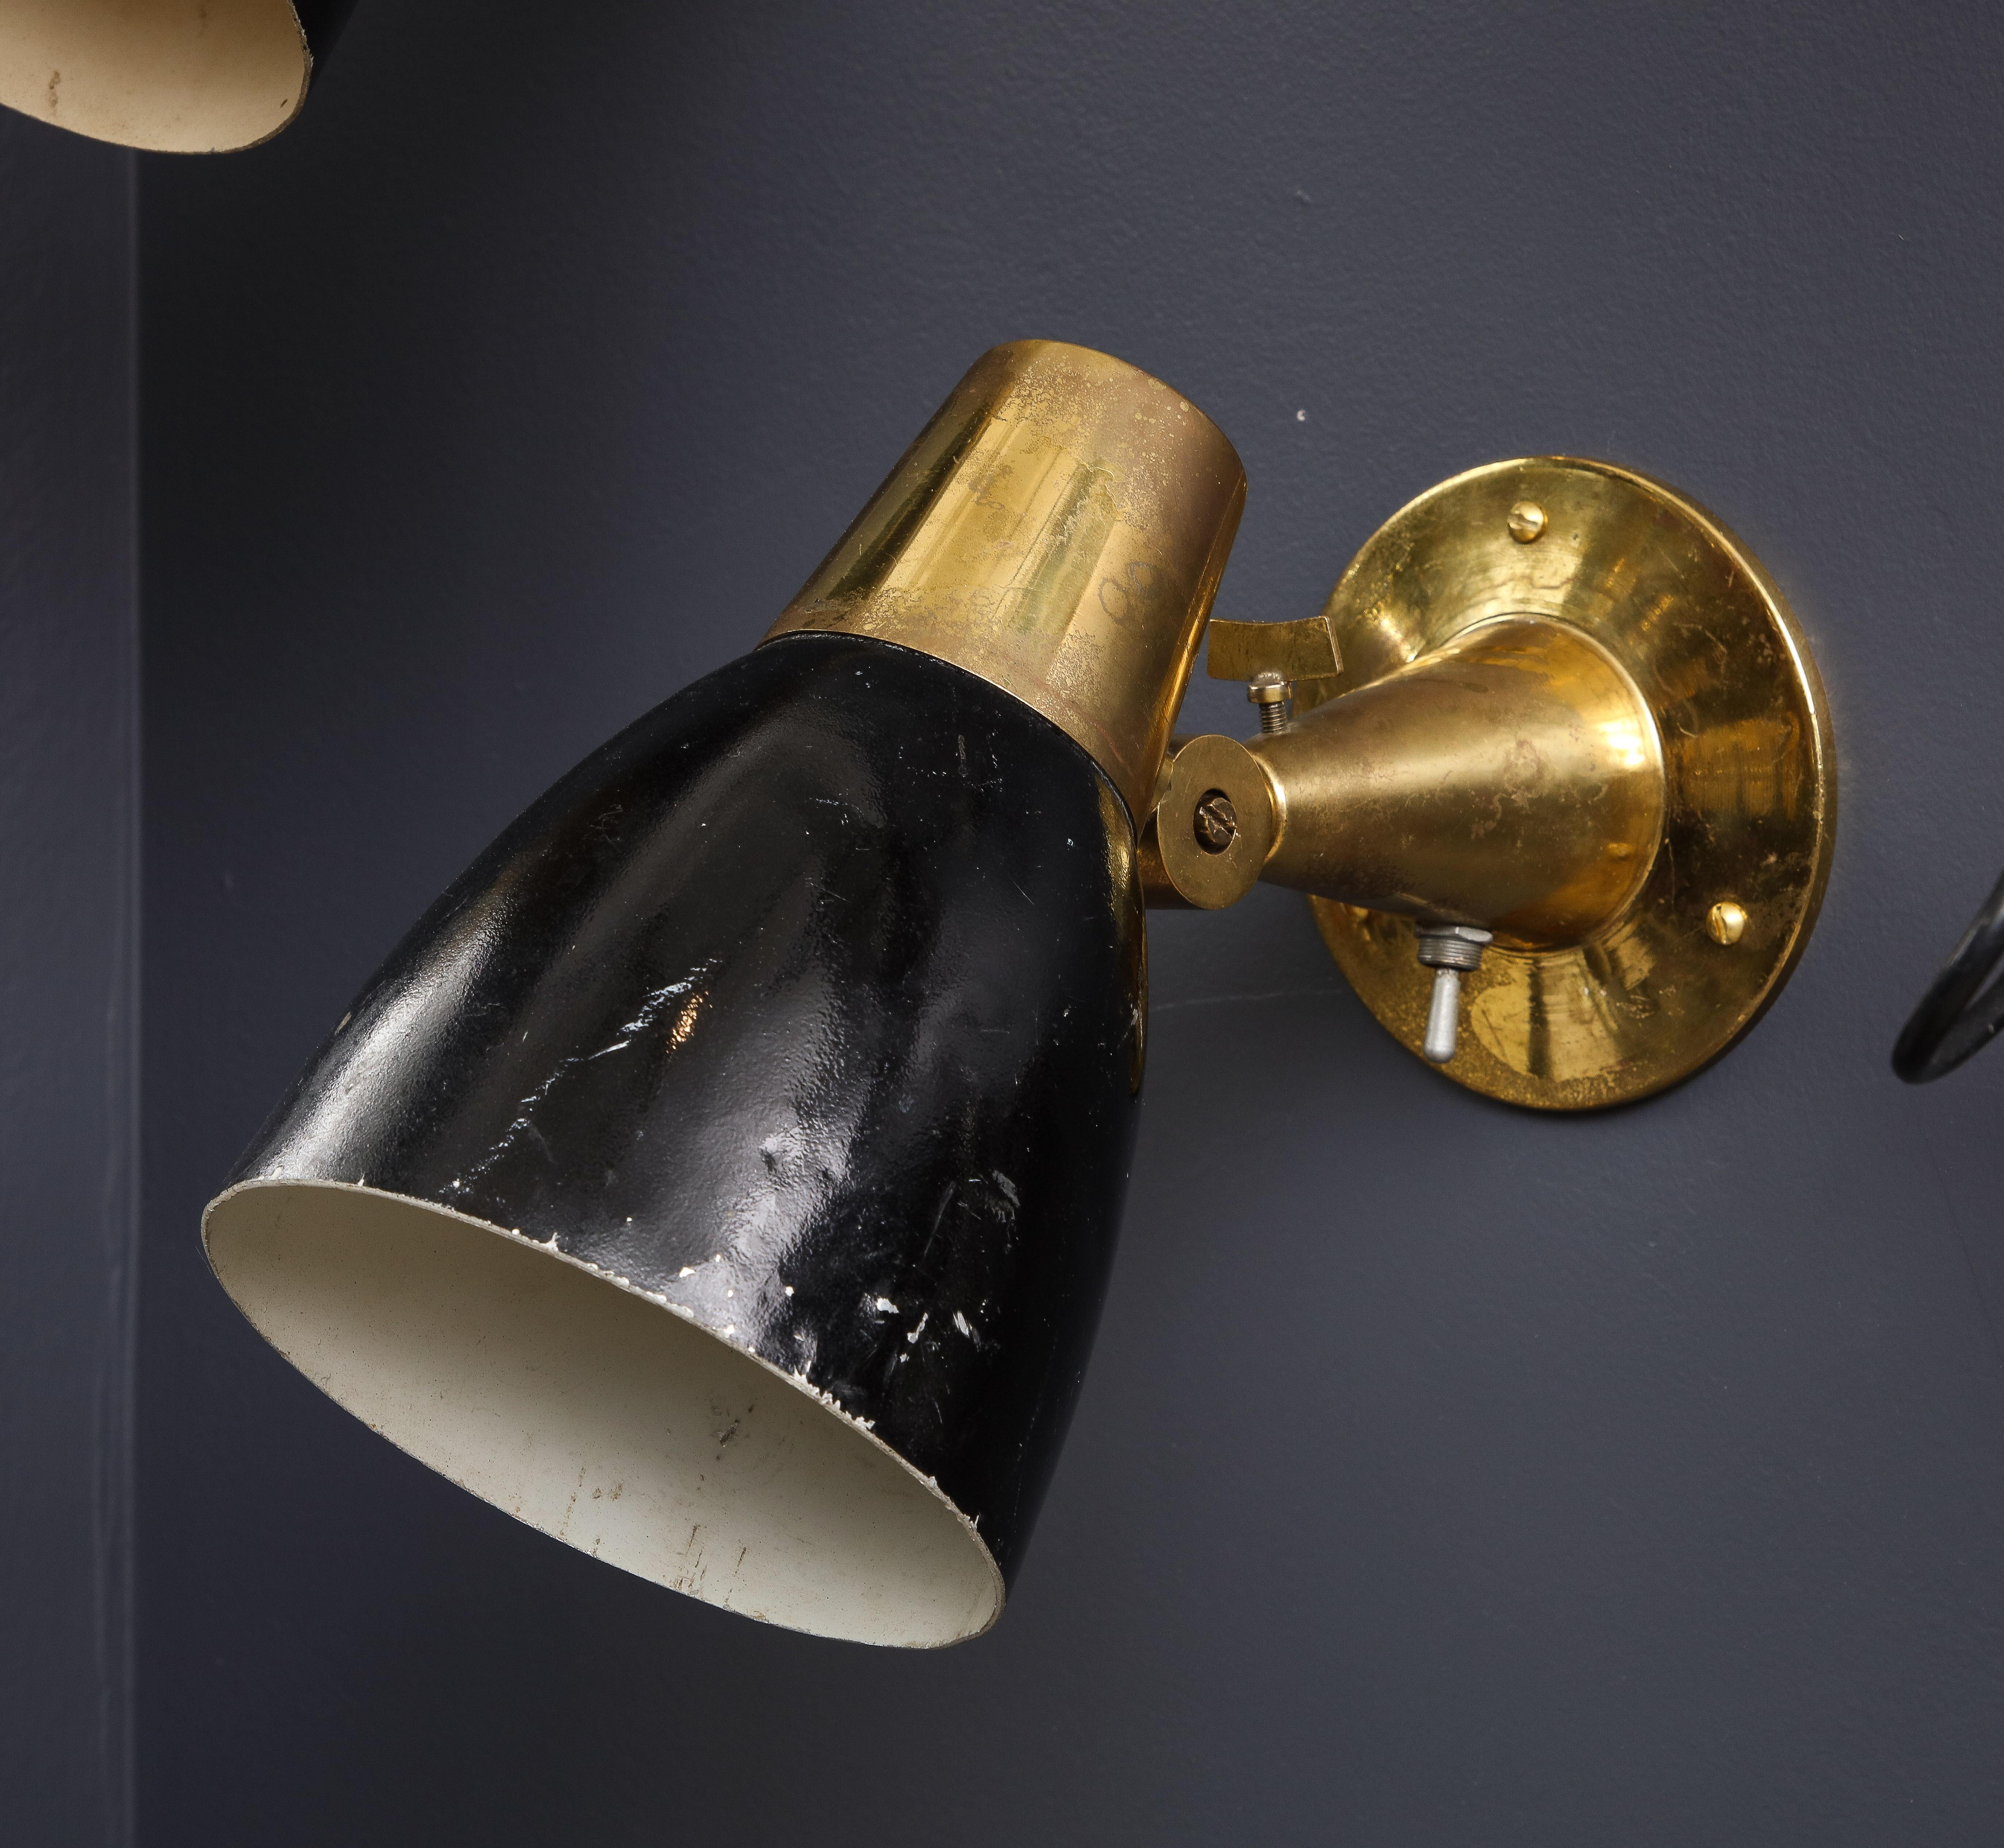 A rare and elegant pair of Italian mid-century wall lights in the style of Oscar Torlasco for Stilux, 1950s. Beautiful brass details with original switch and screw functional. Steel shades are painted in black enamel, price includes repainting of